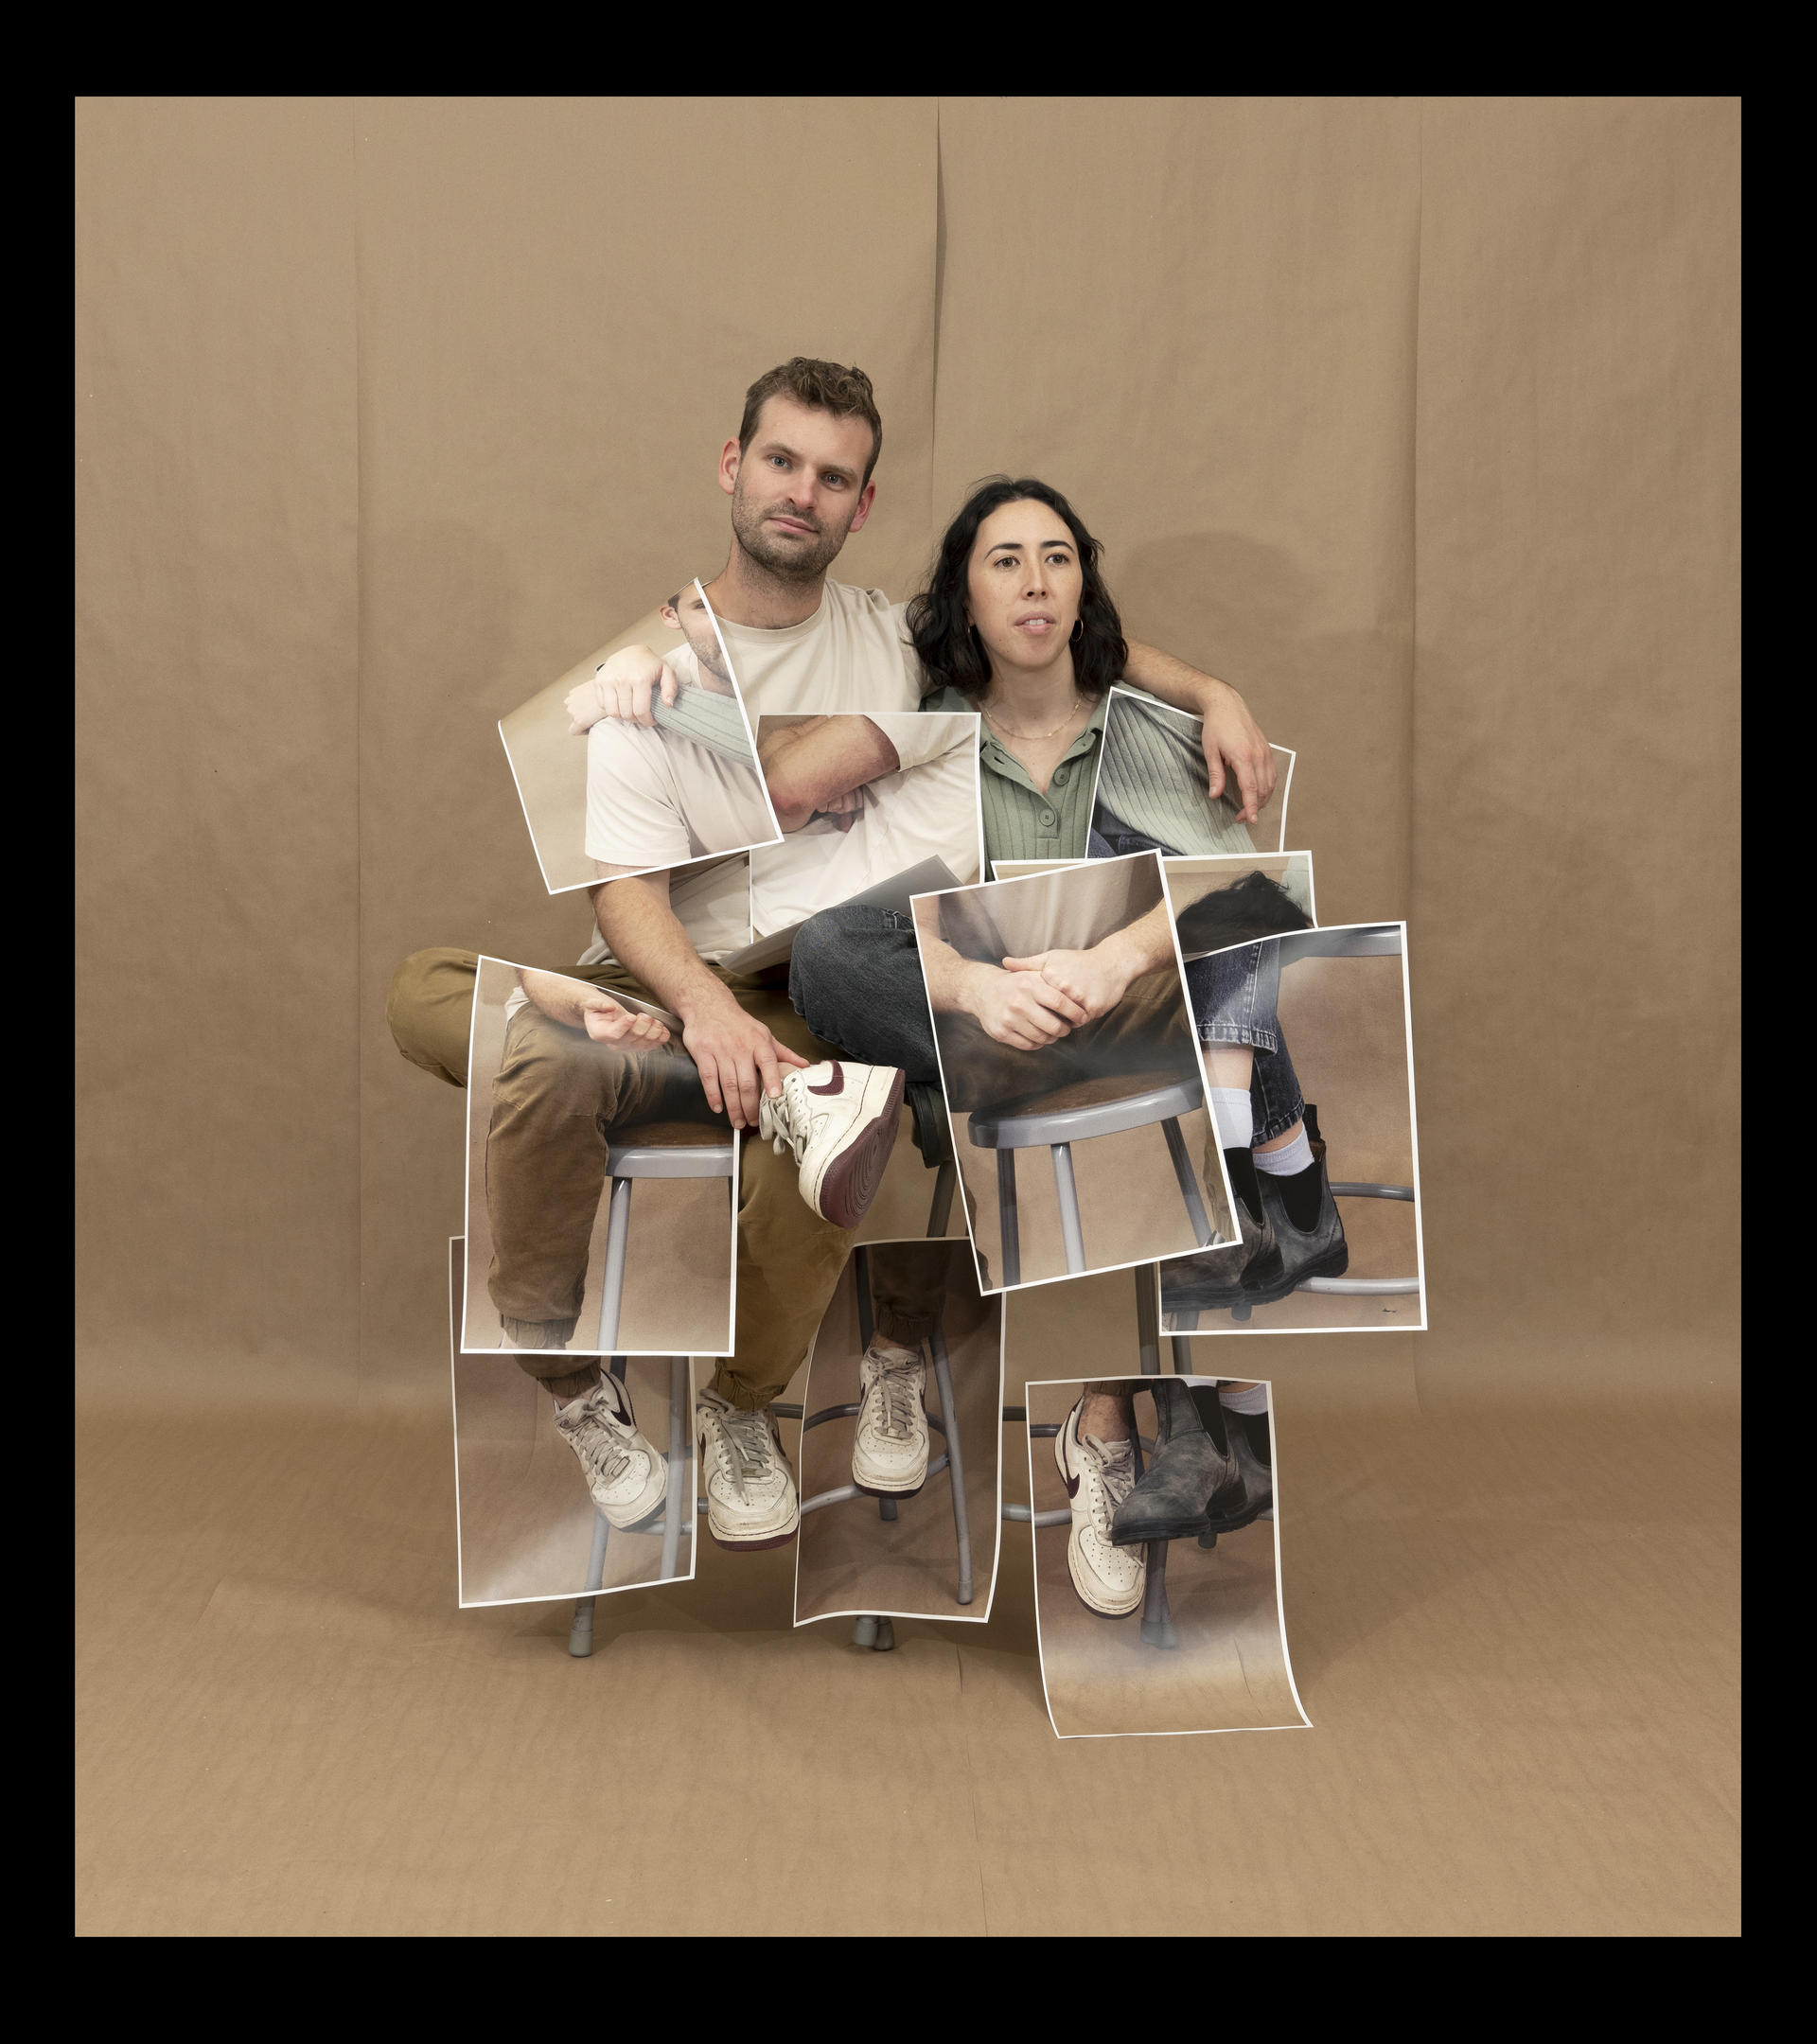 Colin & Lian, Portrait 1, photograph of photos printed and collaged onto portrait sitter